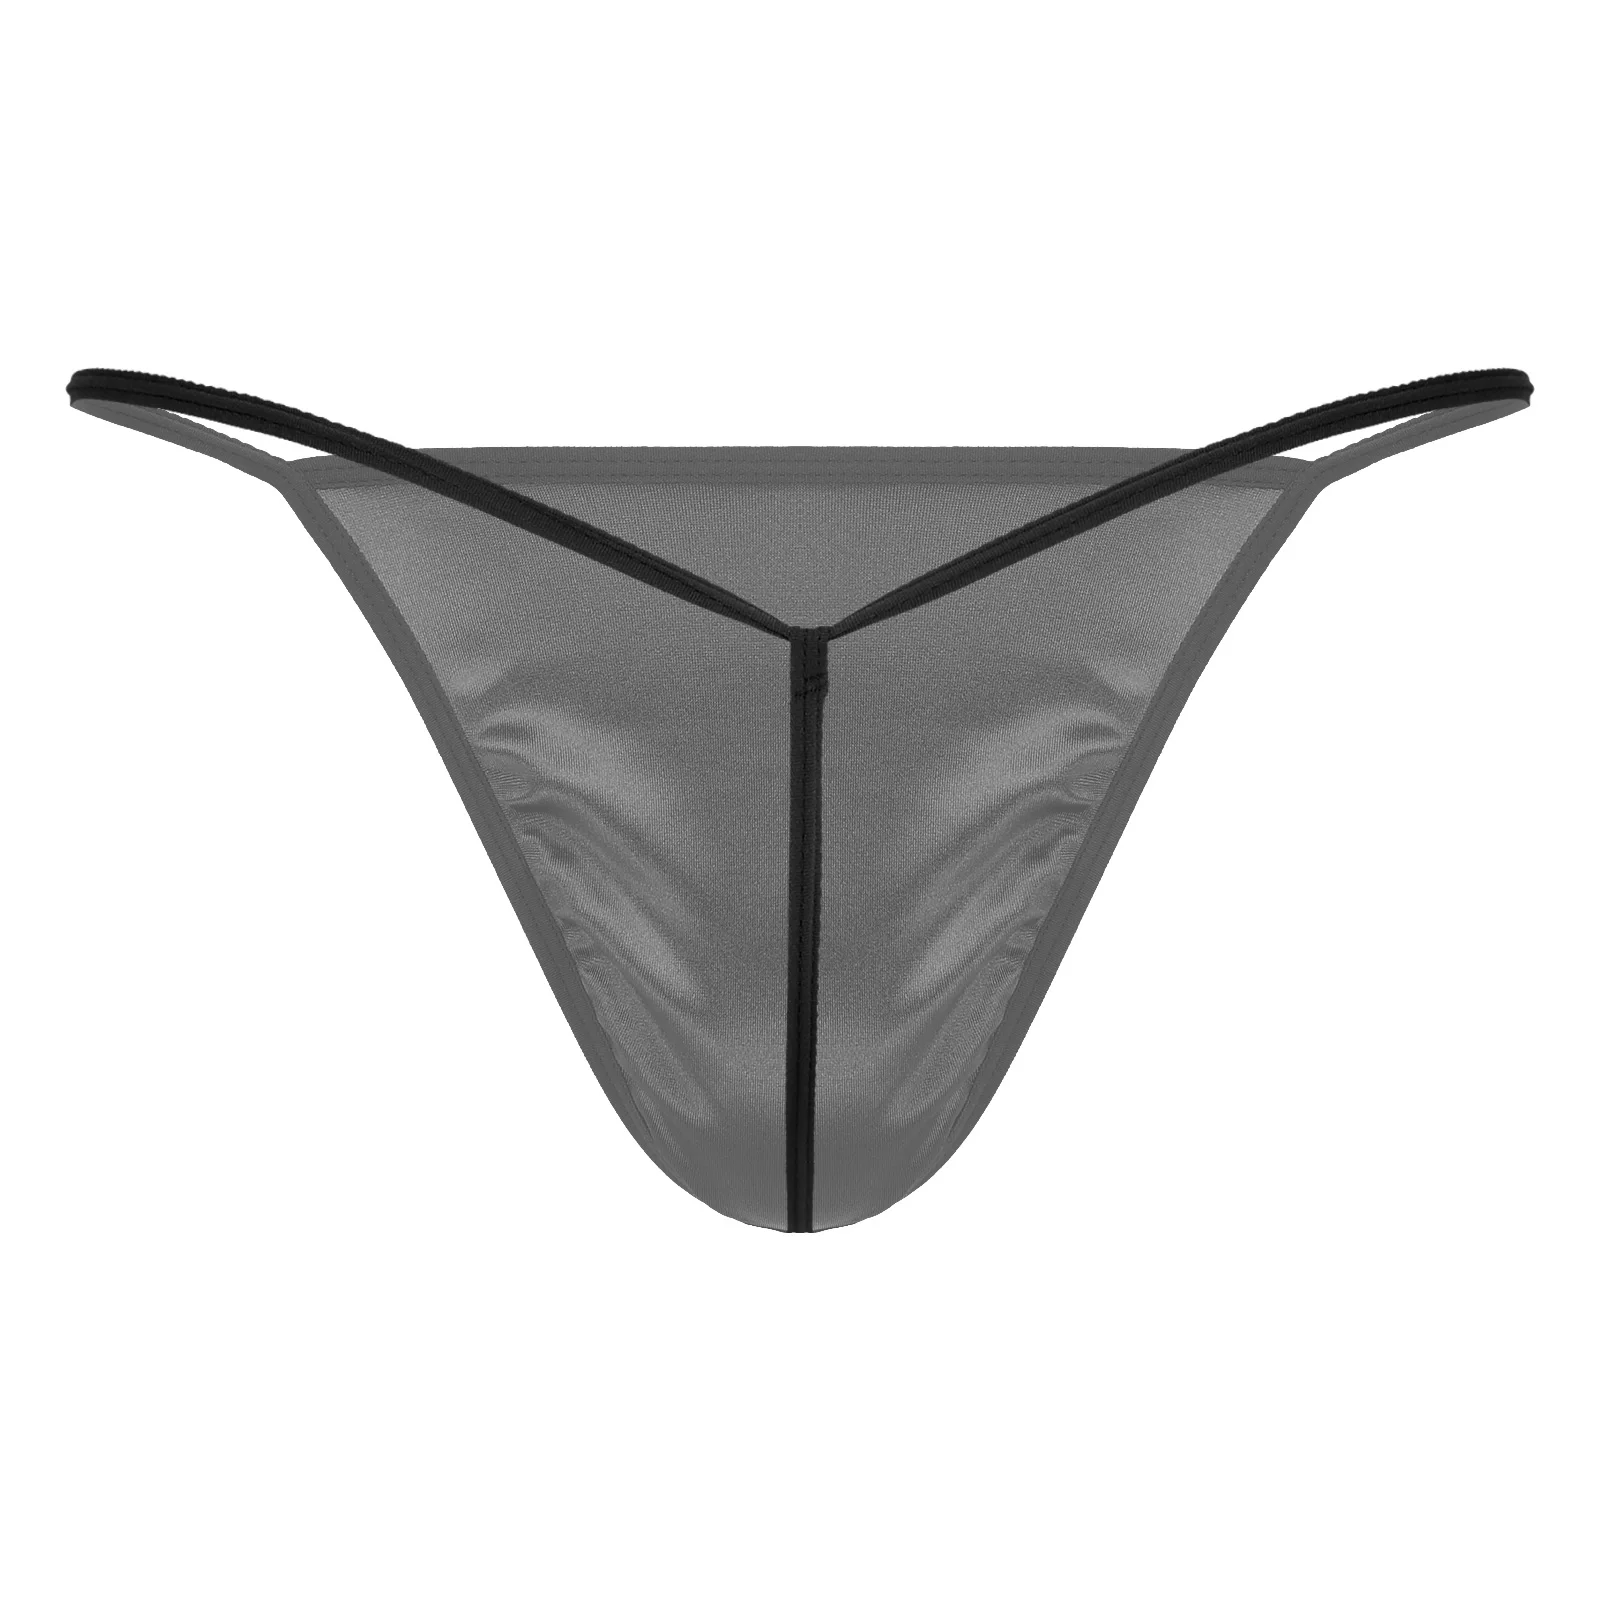 Sexy Mens Open Butt T-back Underpants Satin Bulge Pouch Sissy Panties Lingerie G-string Thongs Solid Color Low Waist Underwear white knee high stockings